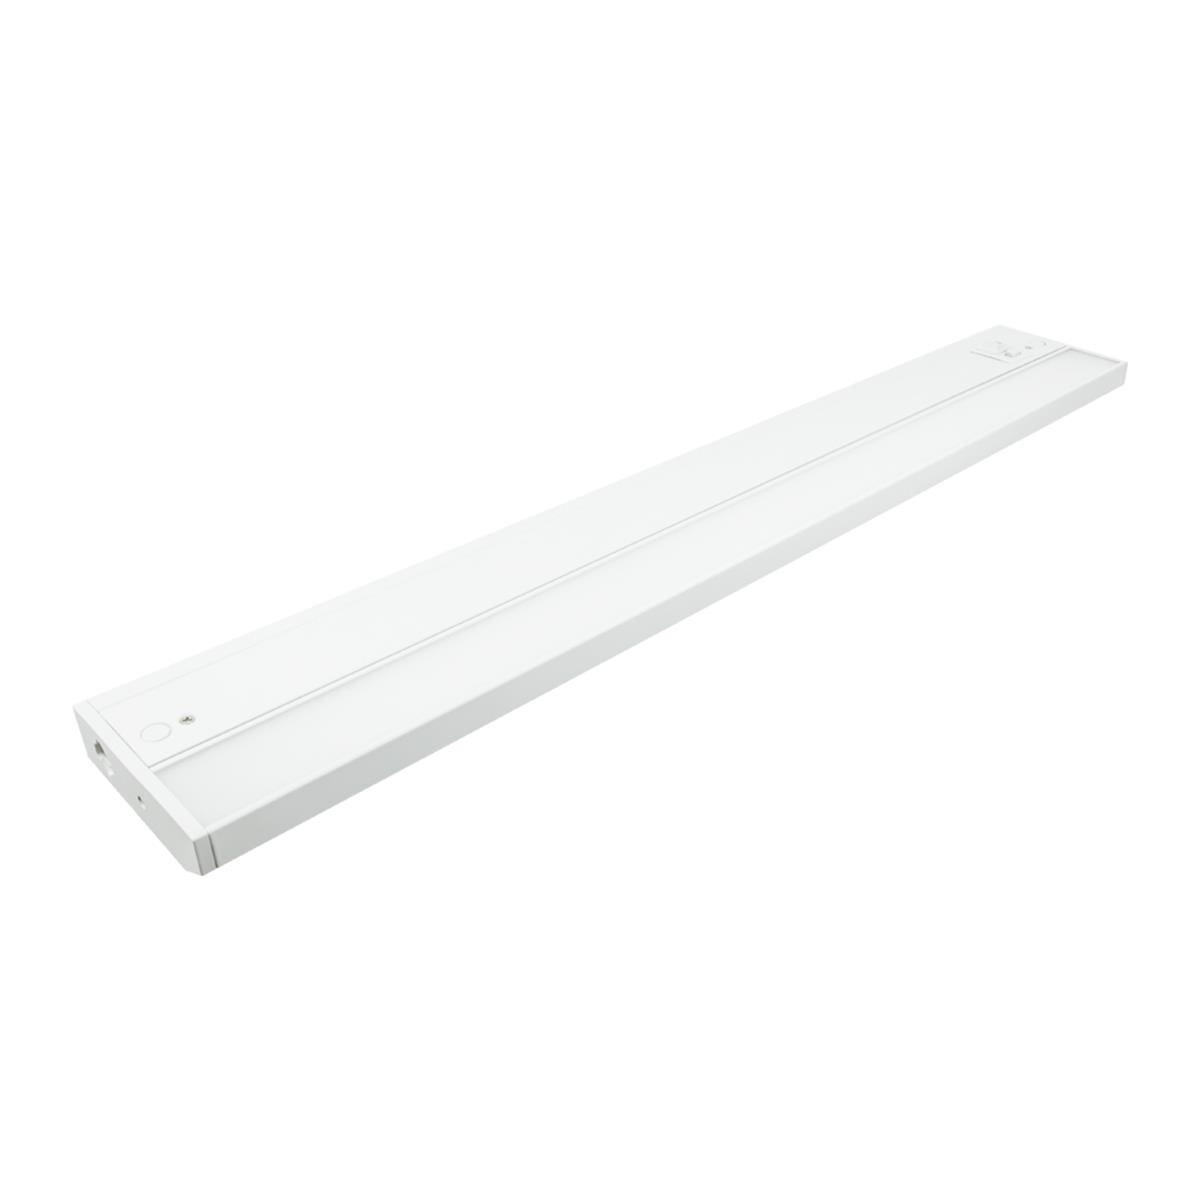 Picture of American Lighting 3LC2-24-WH 24 in. 14.7W 120V LED 3-Complete Dimmable Undercabinet Light - White